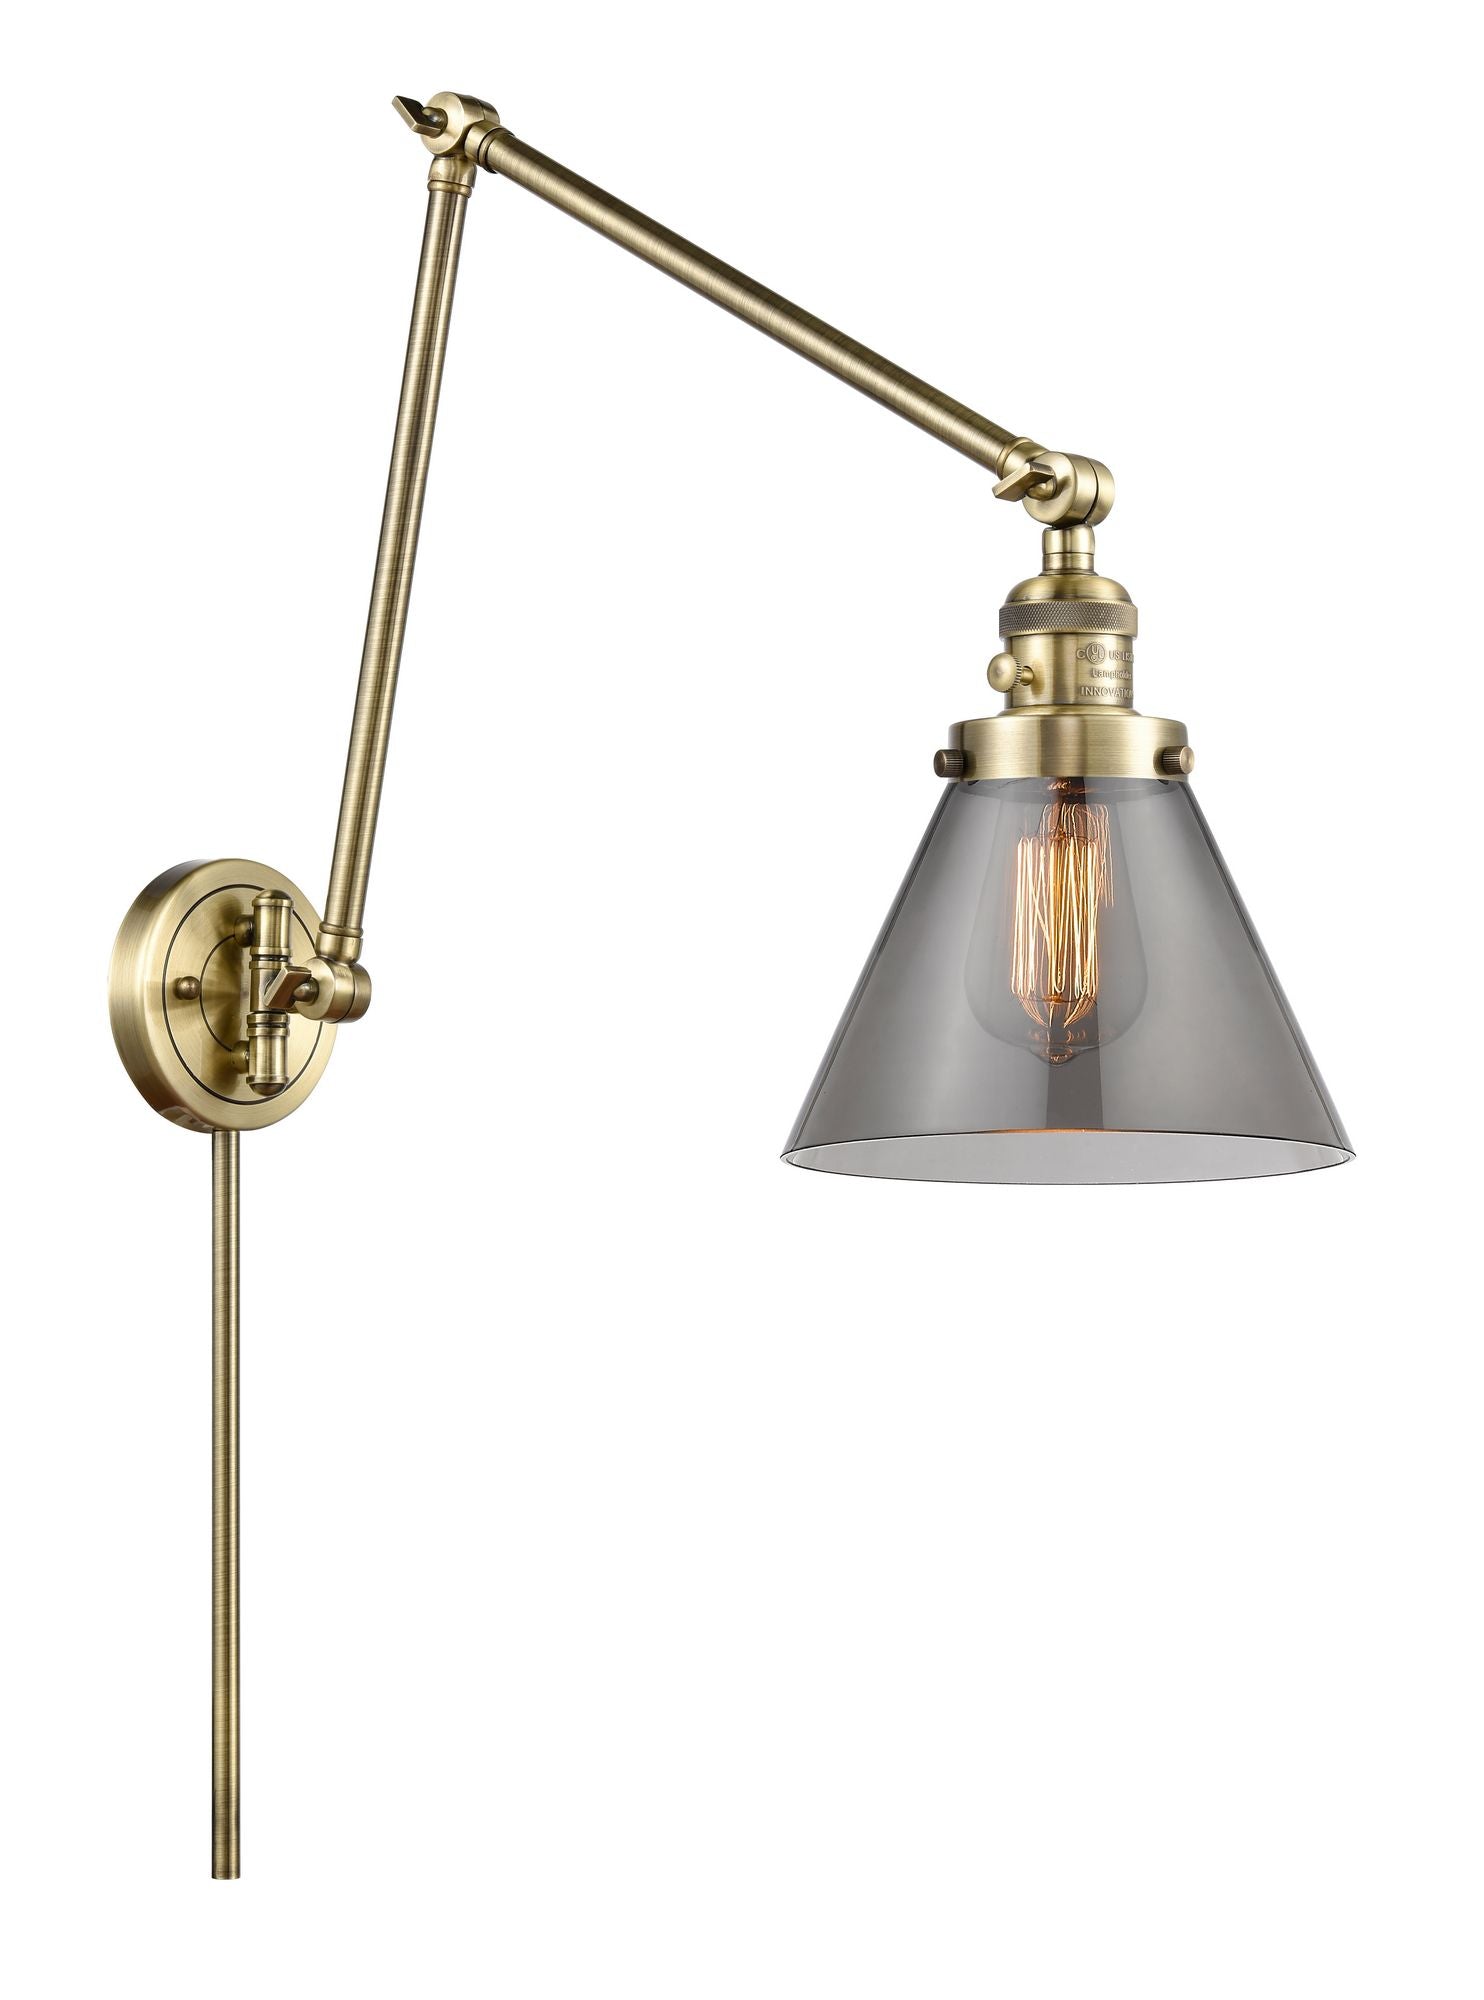 1-Light 8" Cone Swing Arm With Switch - Cone Plated Smoke Glass - Choice of Finish And Incandesent Or LED Bulbs